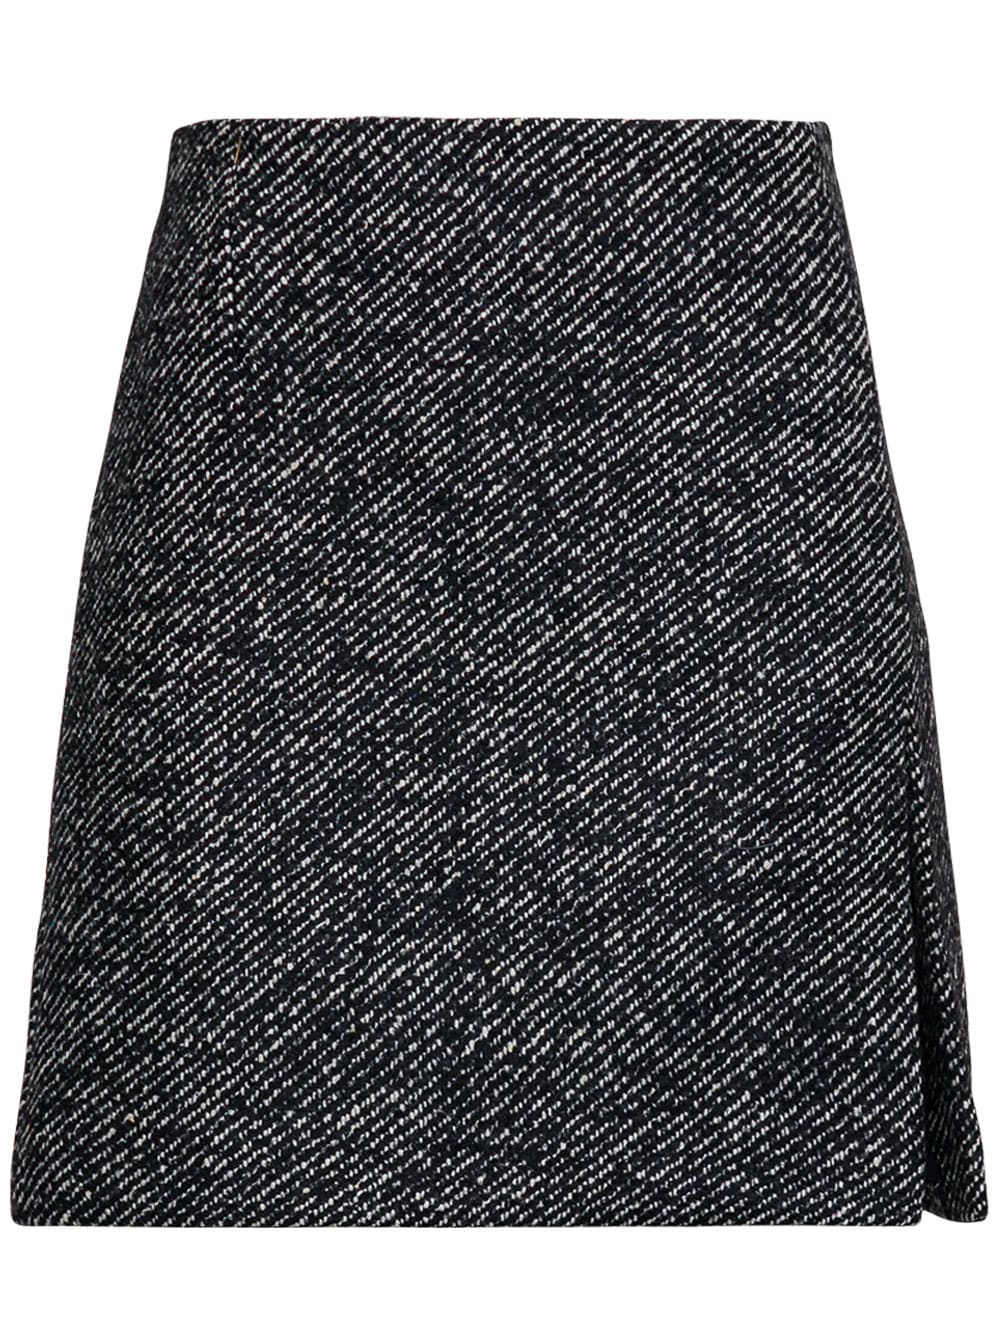 Andamane Black And White Wool Skirt With Slit